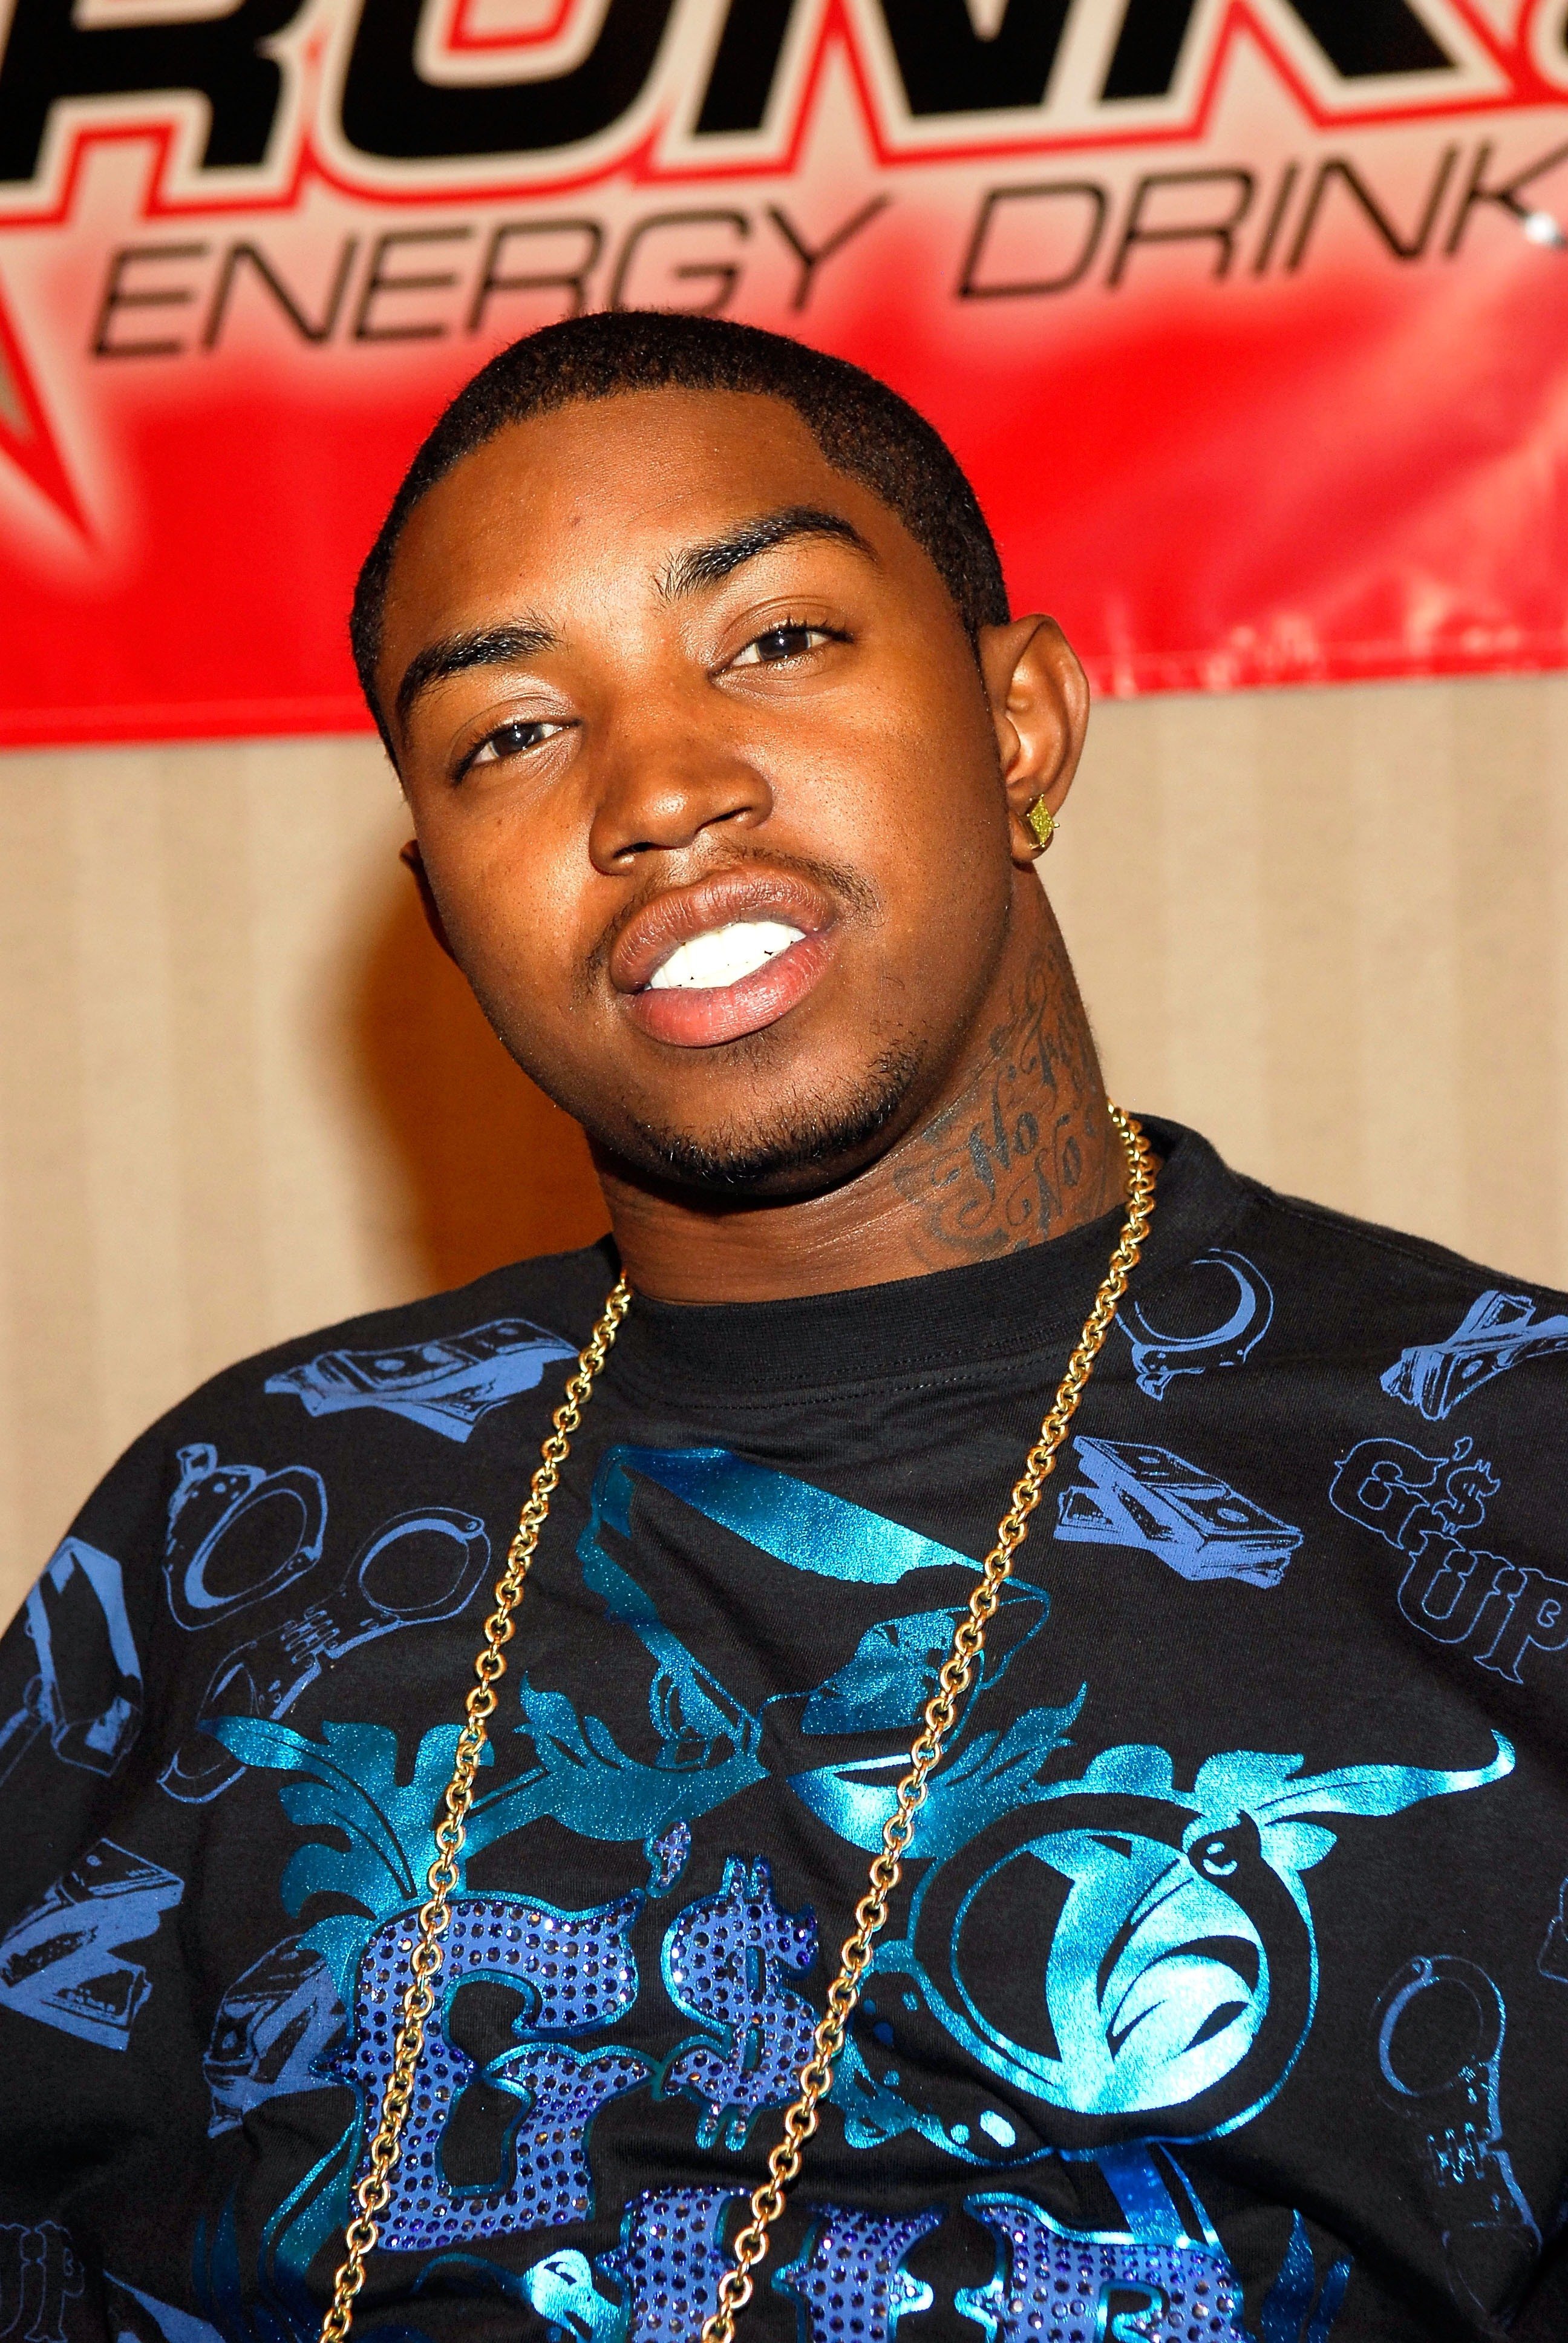 Family man Lil Scrappy attending the Tastemakers Music Conference in Miami in August 2007. | Photo: Getty Images